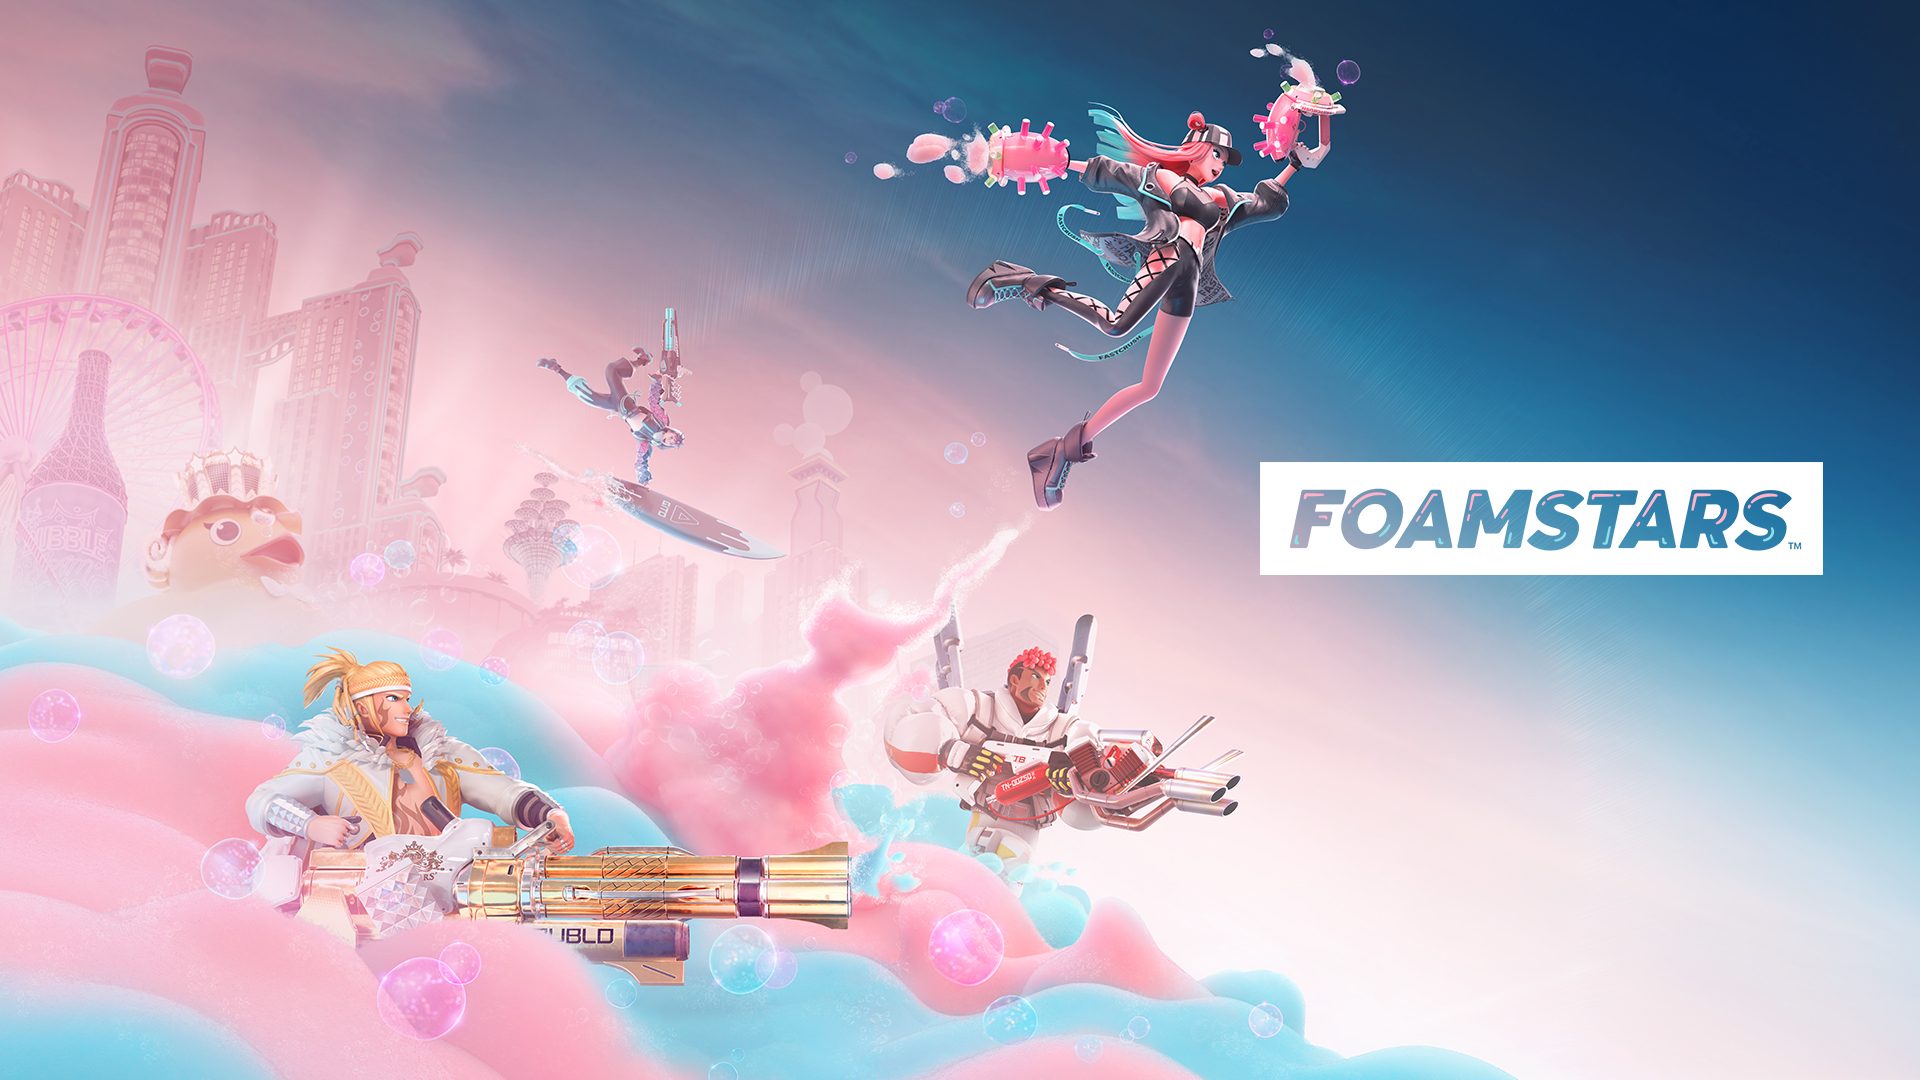 Foamstars Season 2 Release Date Confirmed - Introducing You To “Groovy Disco”! 